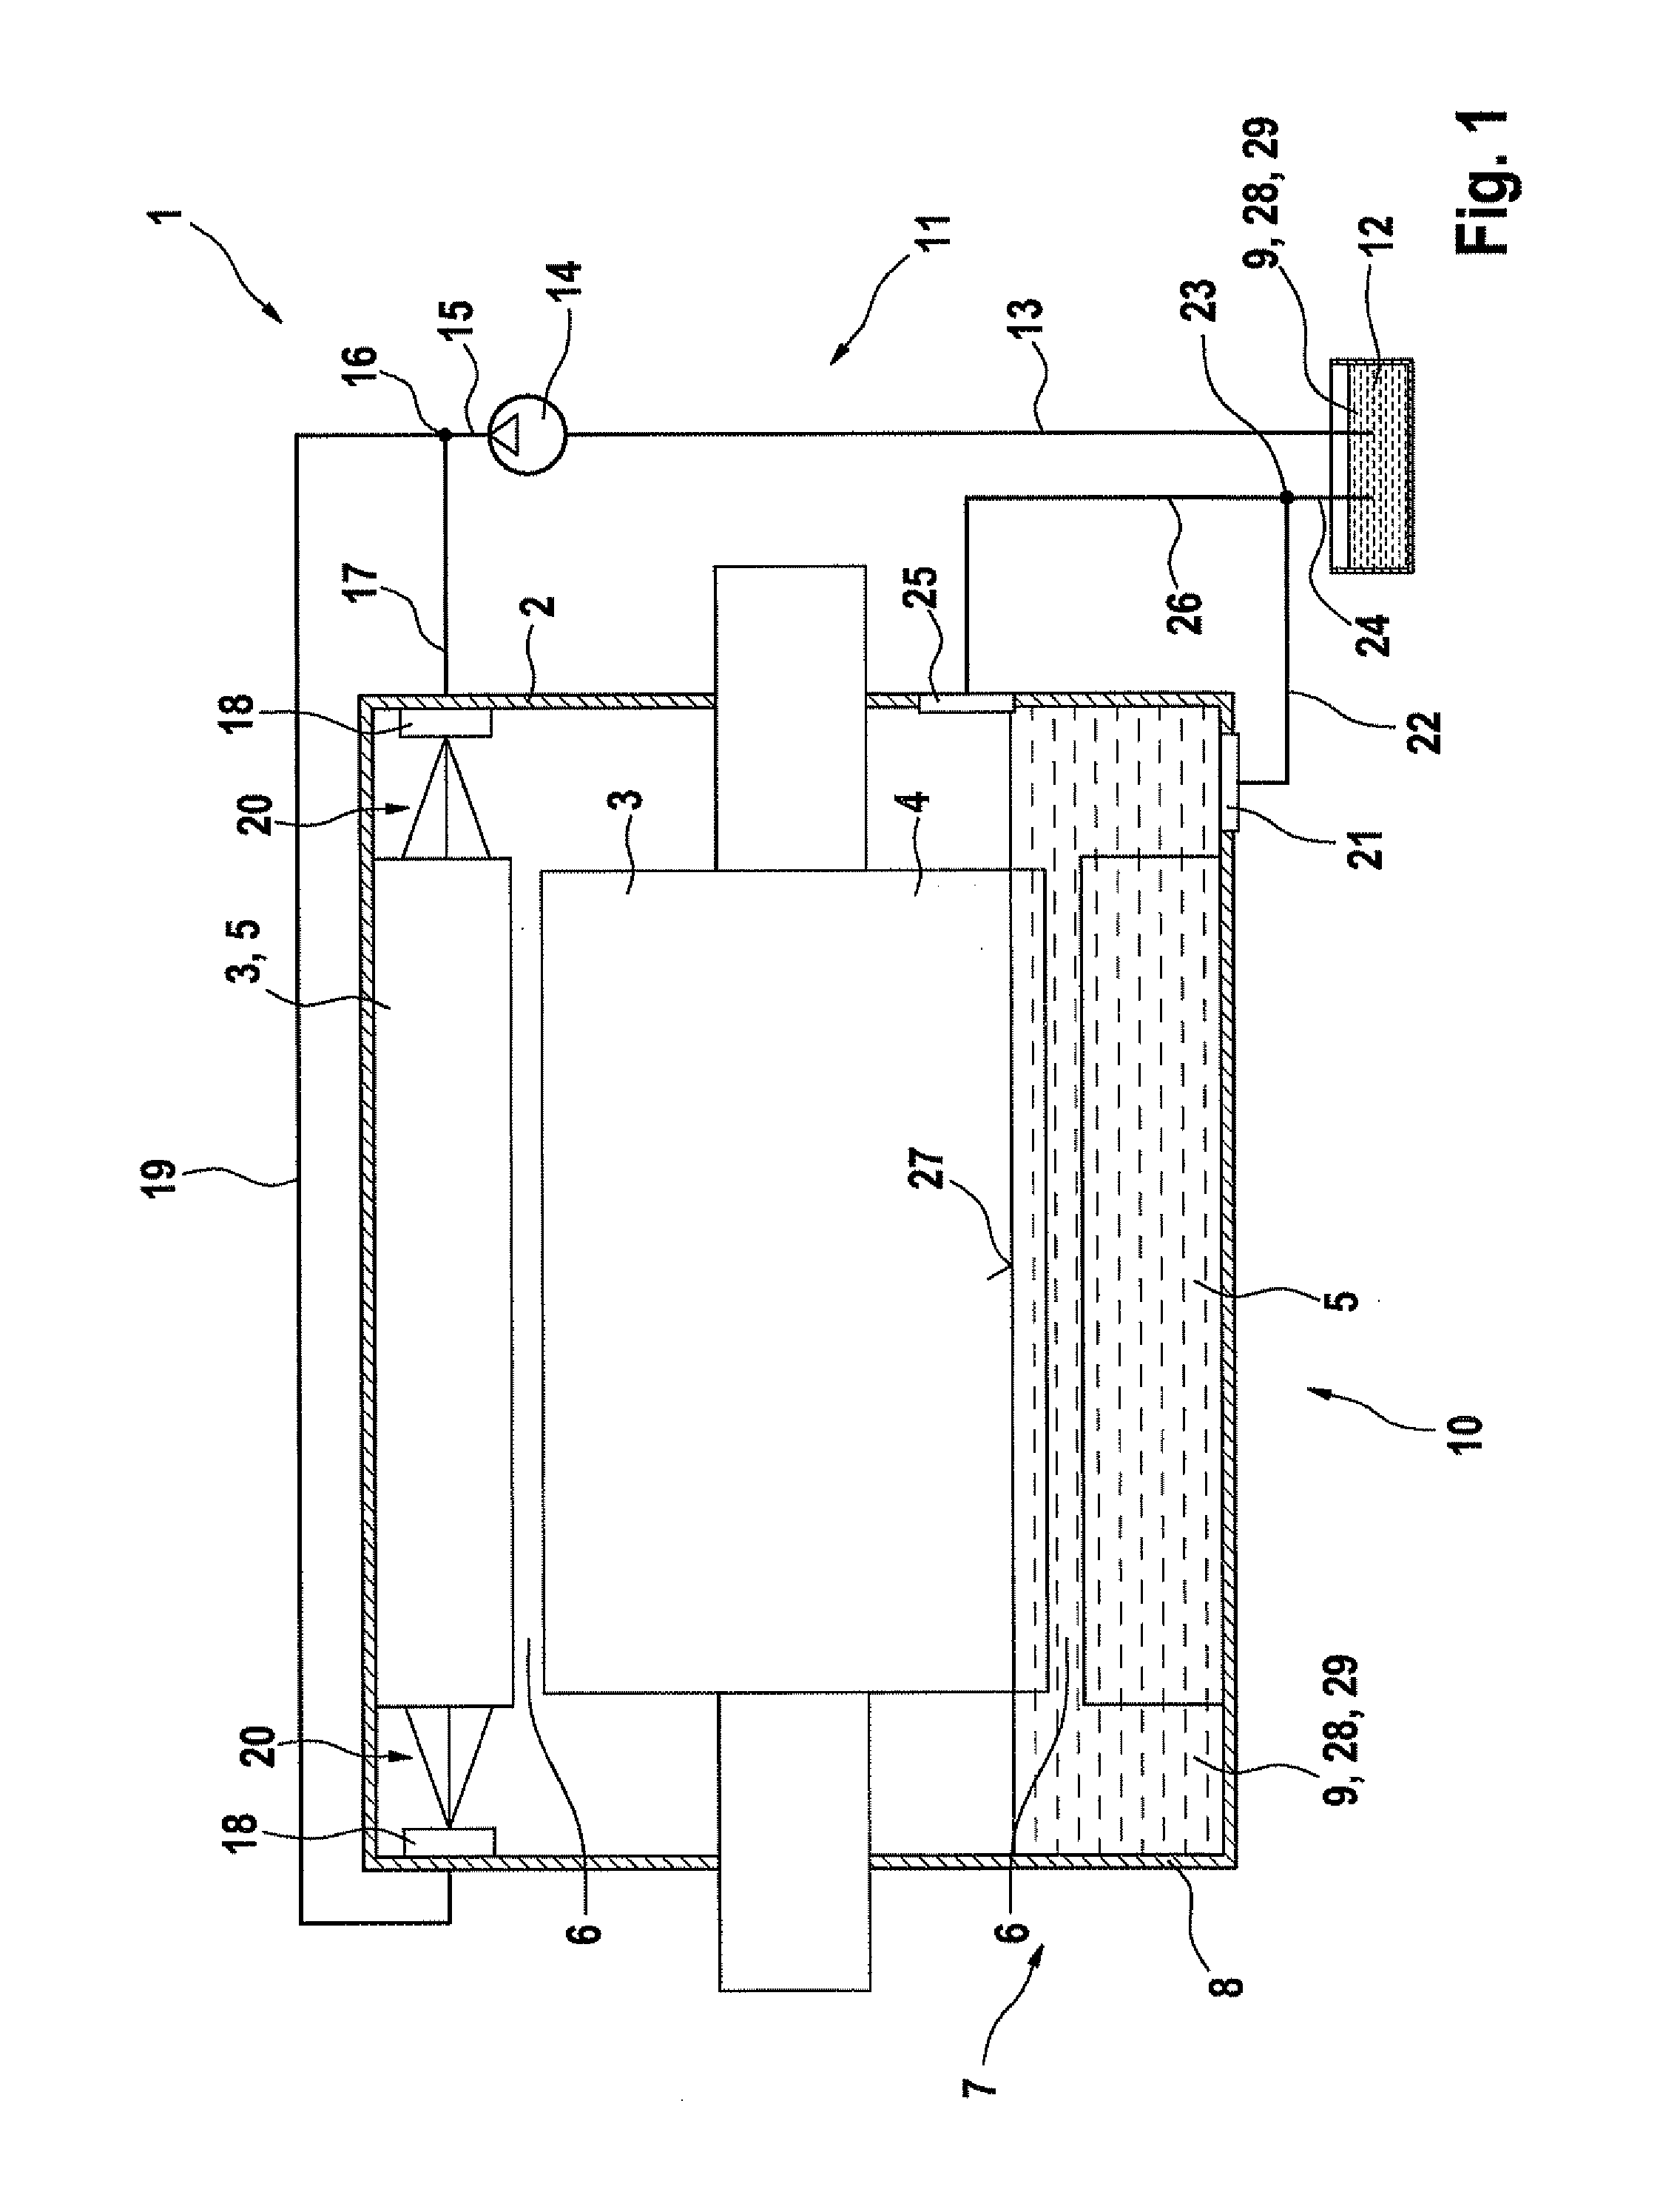 Electric machine having spray and sump cooling